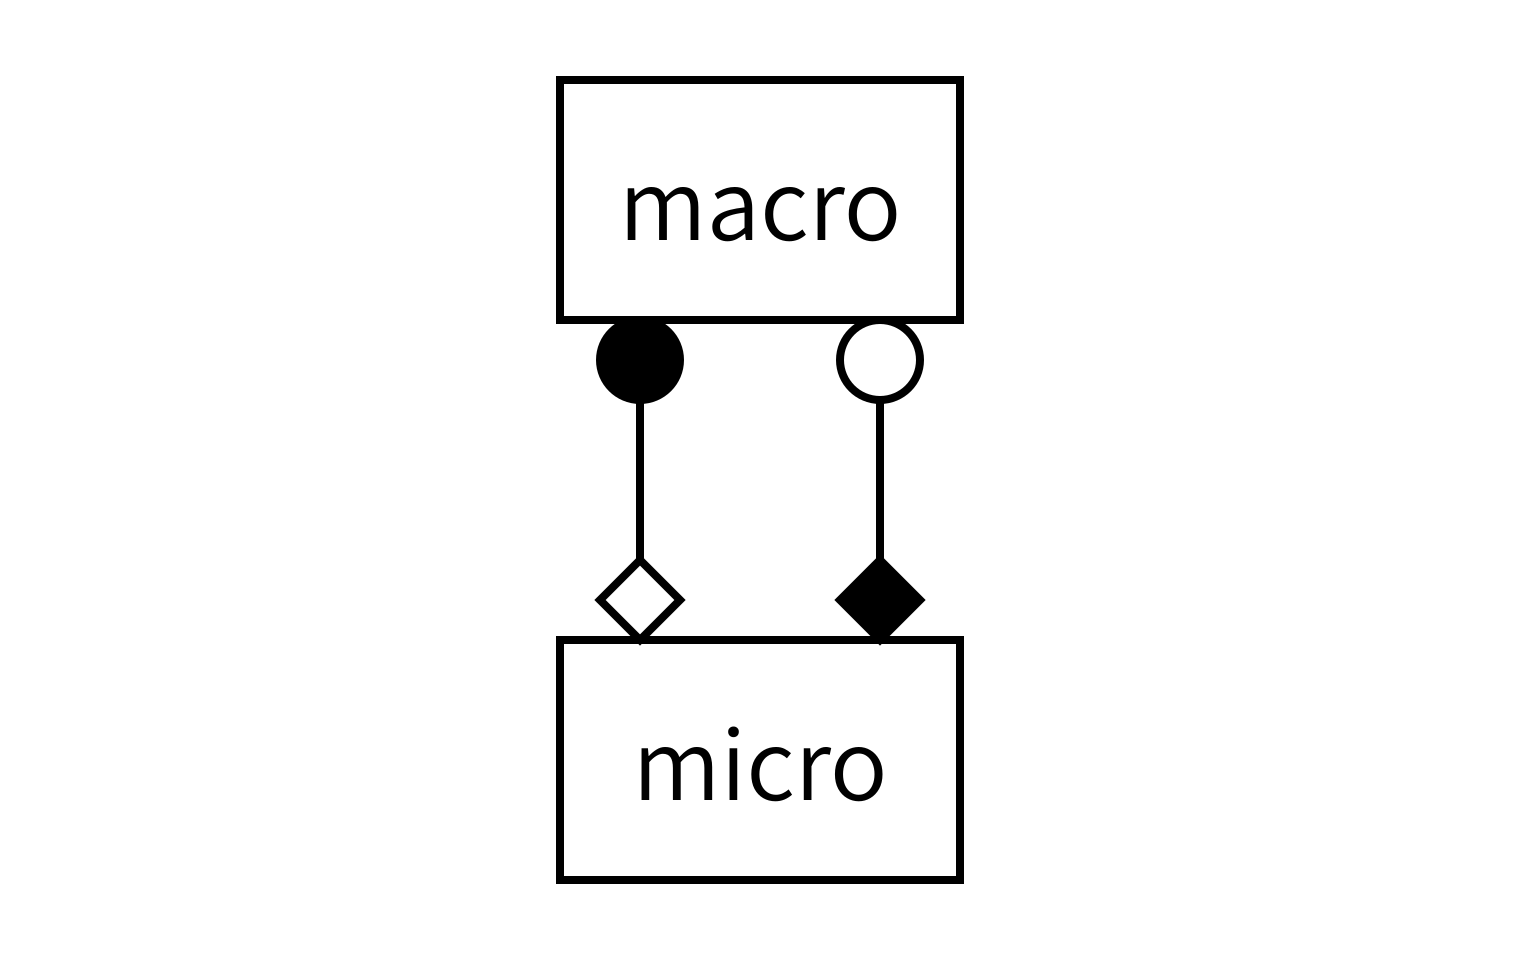 gMMSL diagram for the reaction-diffusion model. Two boxes labeled macro and micro represent the two submodels. A line connects a filled circle labeled state_out on macro to an open diamond labeled state_in on micro. A second line connects a filled diamond labeled final_state on micro to an open circle labeled state_in on macro.